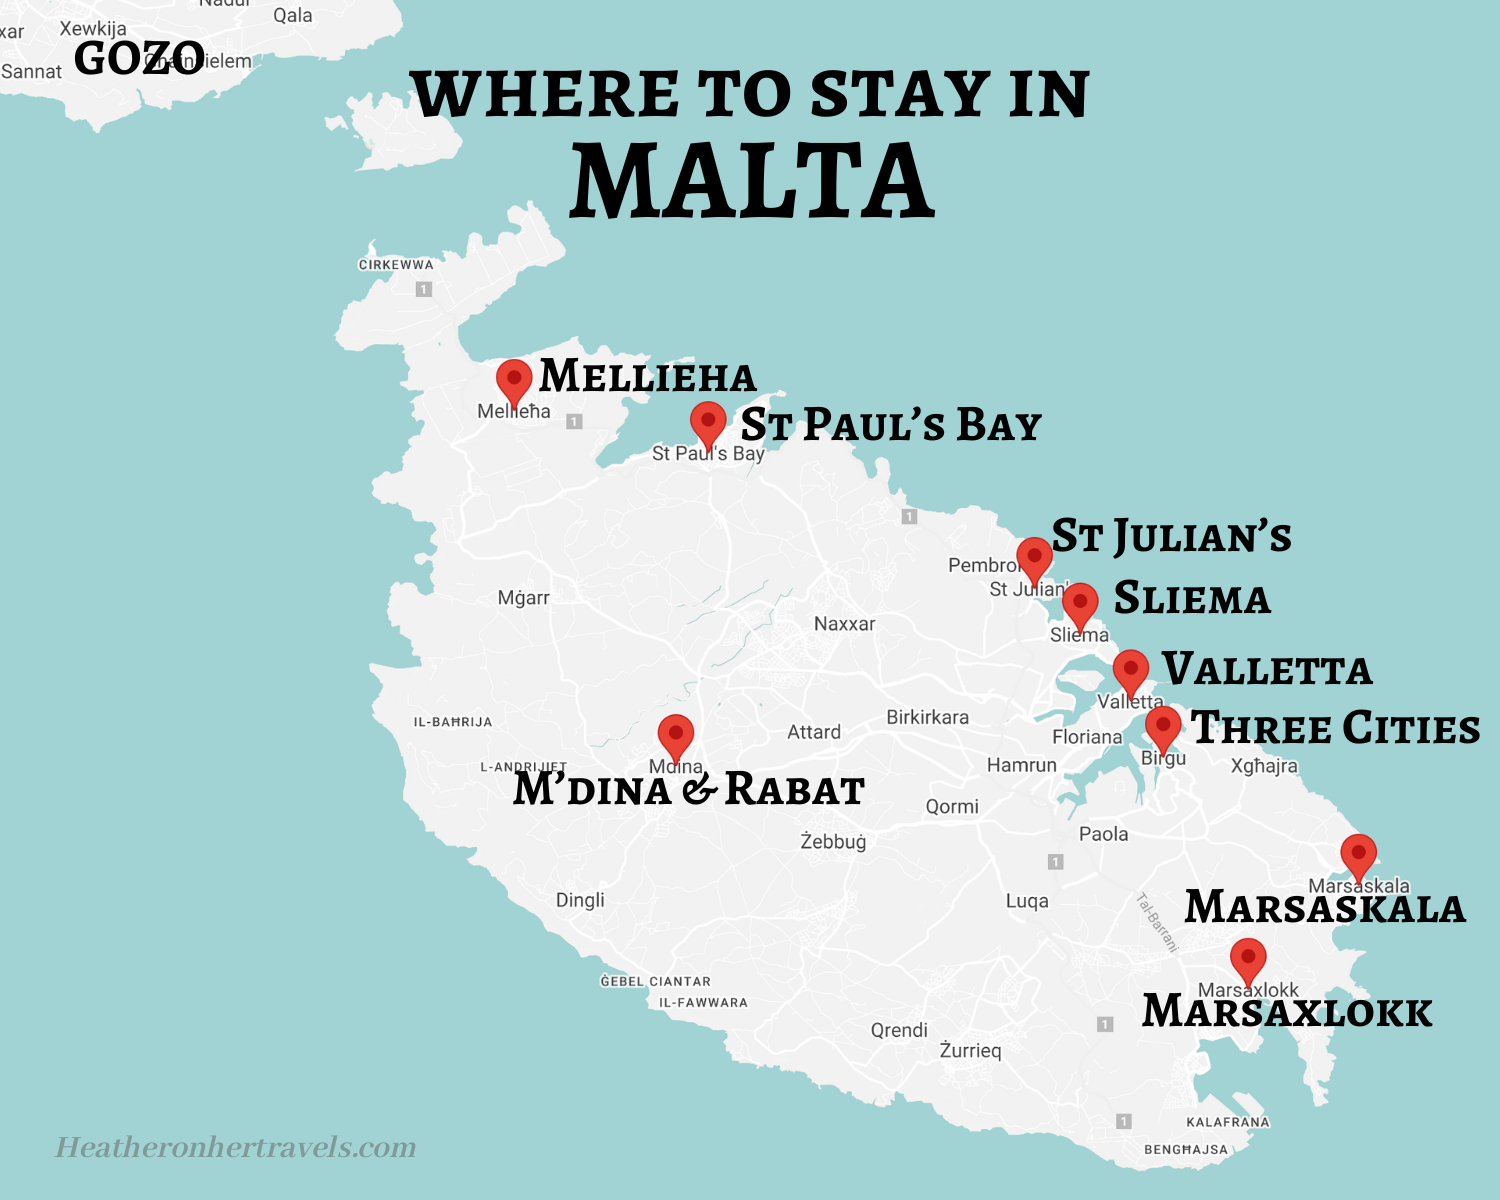 Where to stay Malta Map